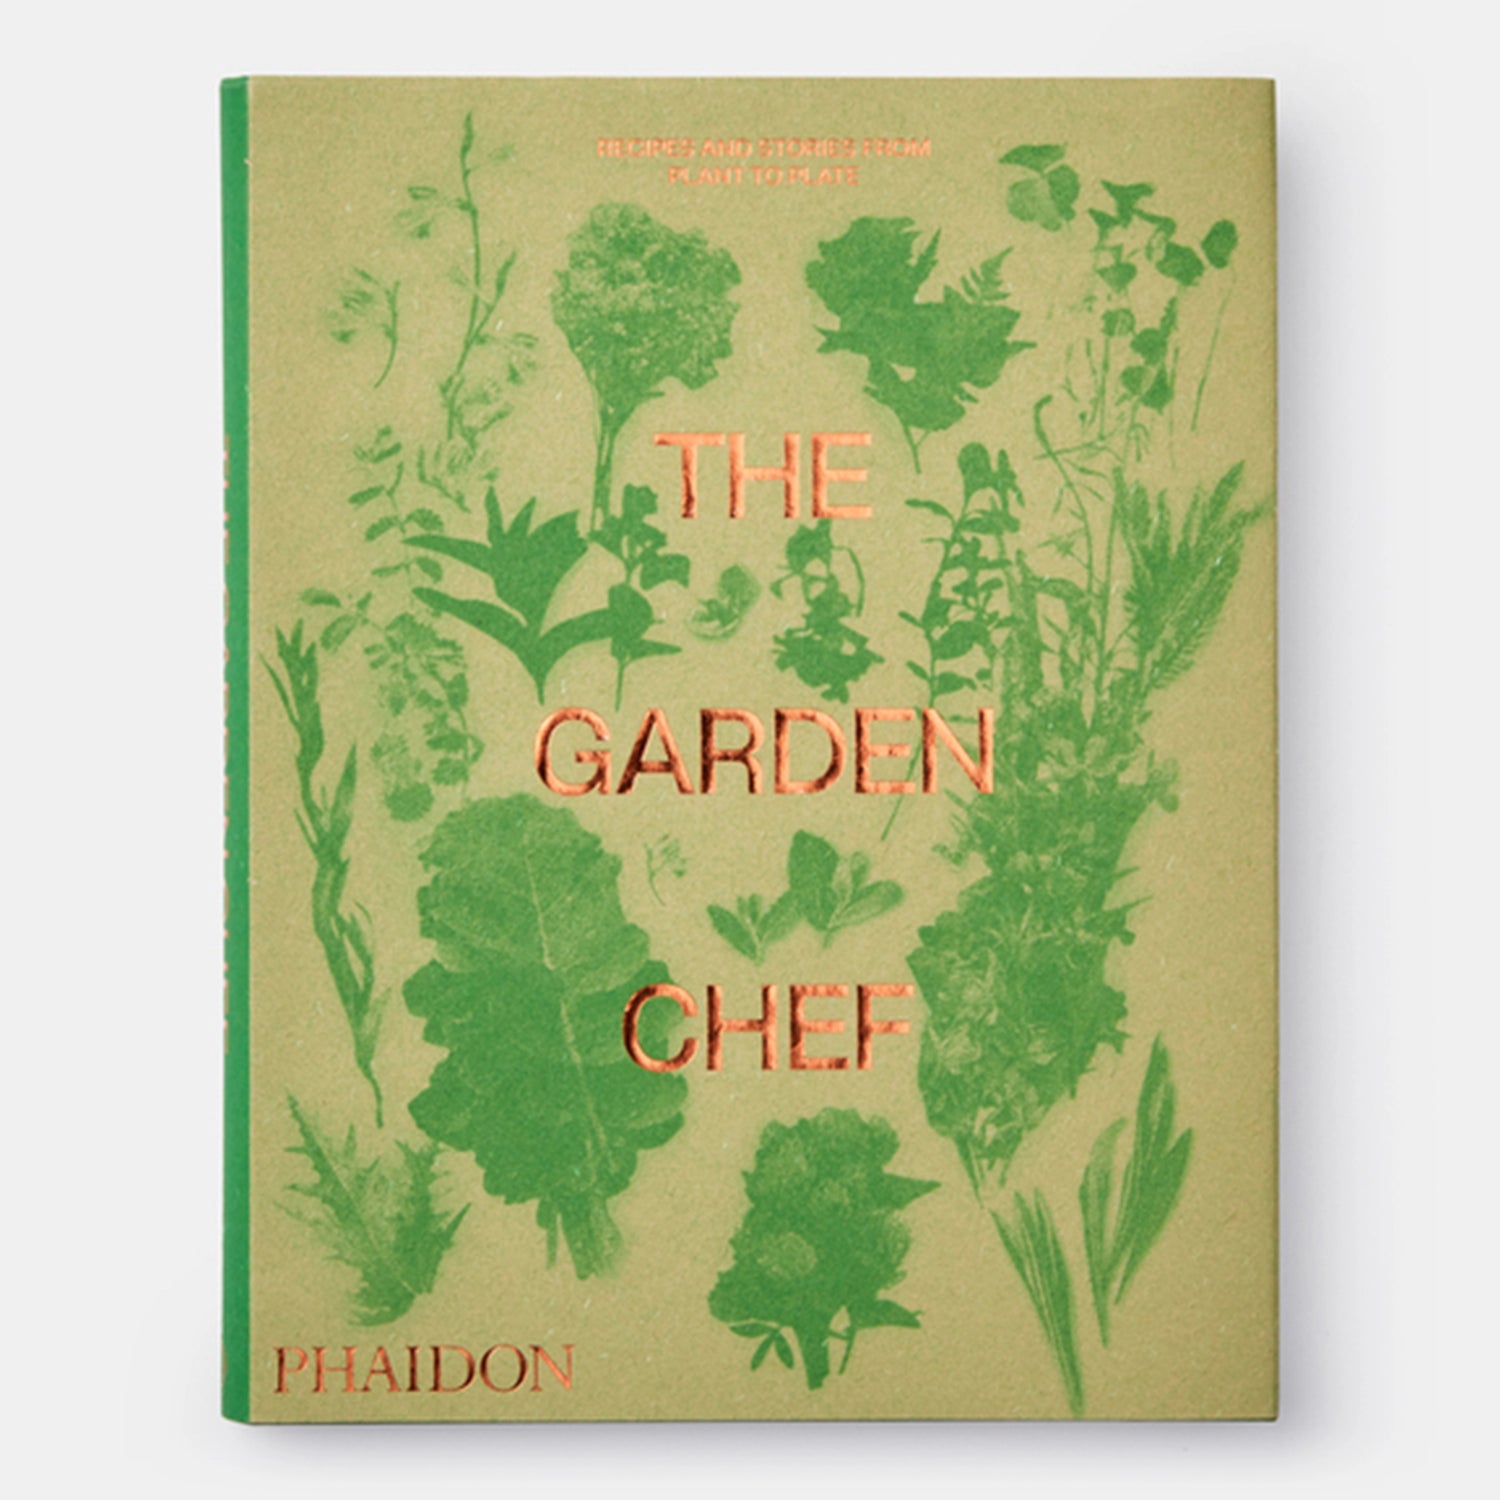  Phaidon The Garden Chef: Recipes and Stories from Plant to Plate 9780714878225 The Green Thumb Club